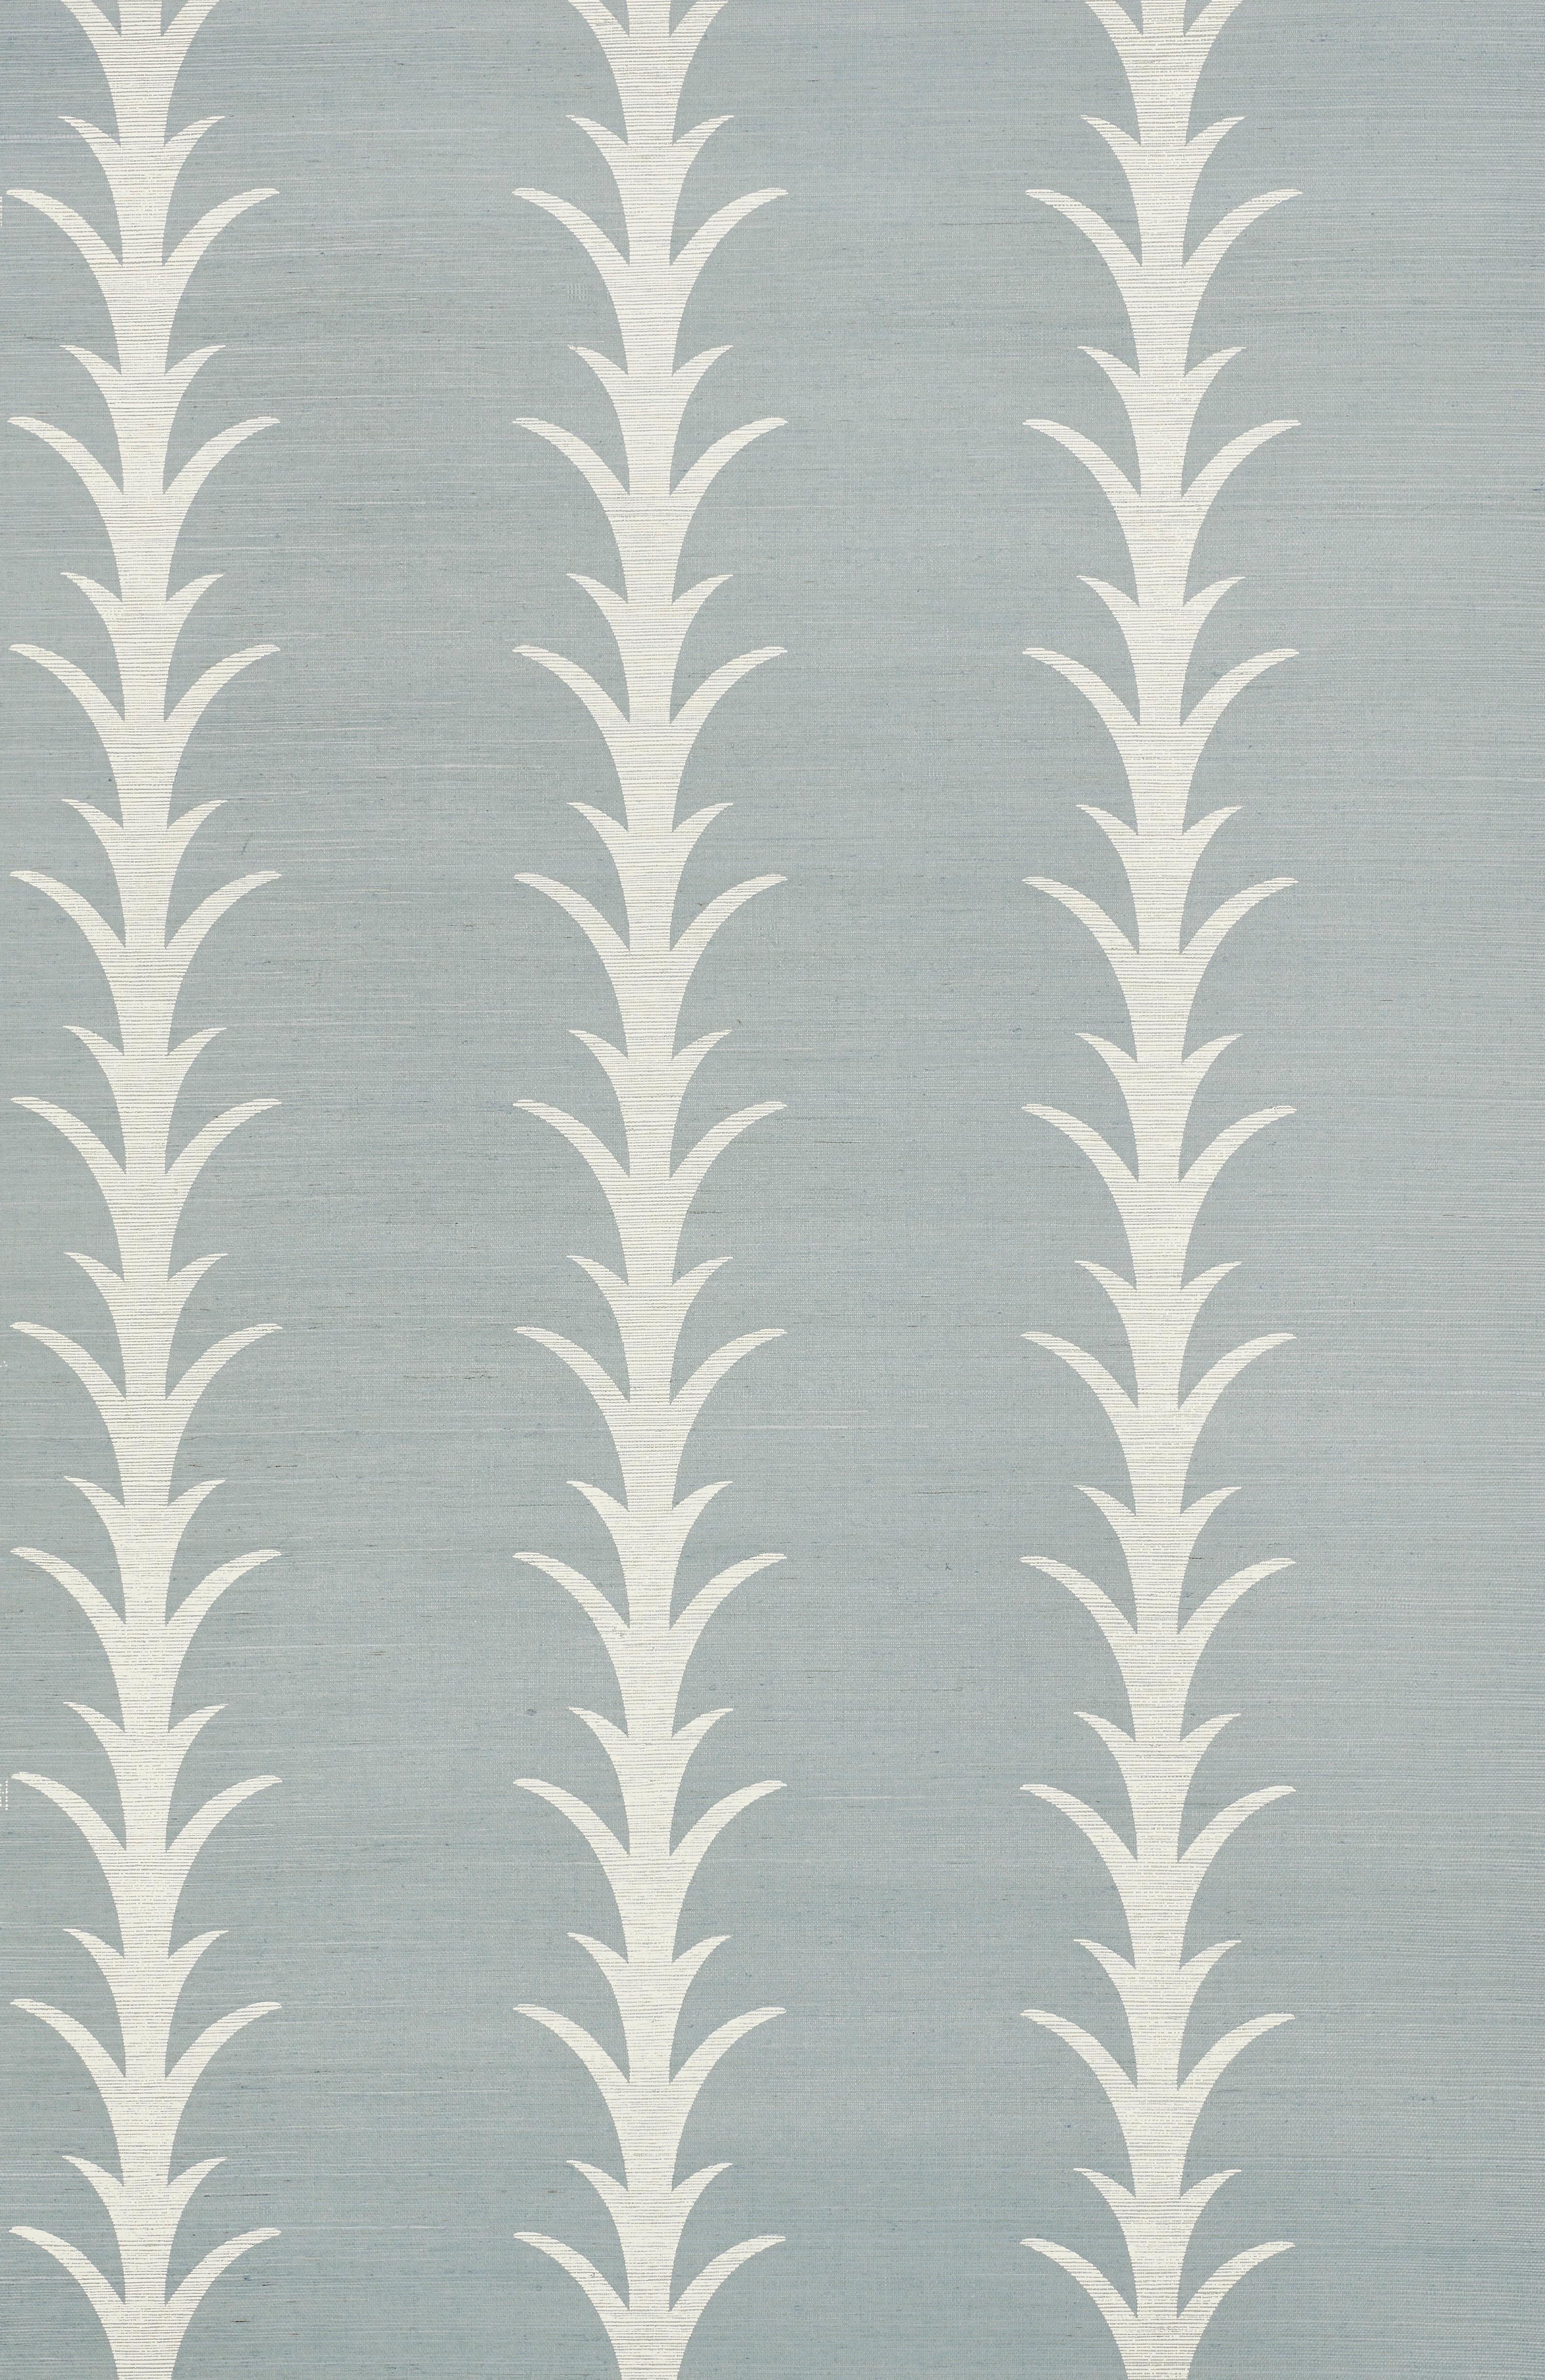 This pattern is a stylized stripe based on a classic acanthus motif. Elegant and airy, the design is printed on a sisal ground, giving it subtlety and dimension.

Since Schumacher was founded in 1889, our family-owned company has been synonymous